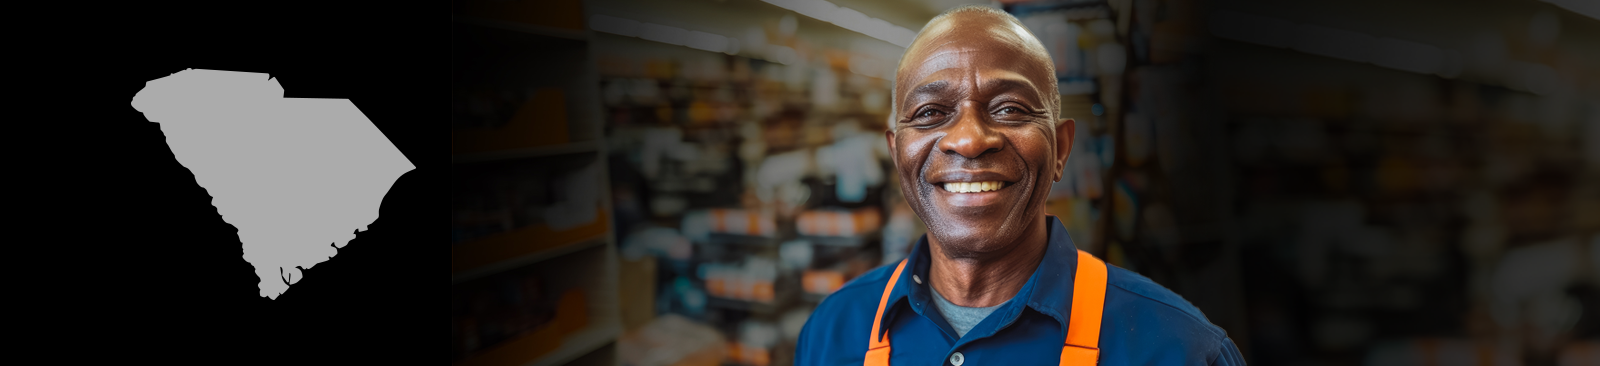 An older hardware store worker in a blue and orange apron stands in his shop and smiles at the camera.